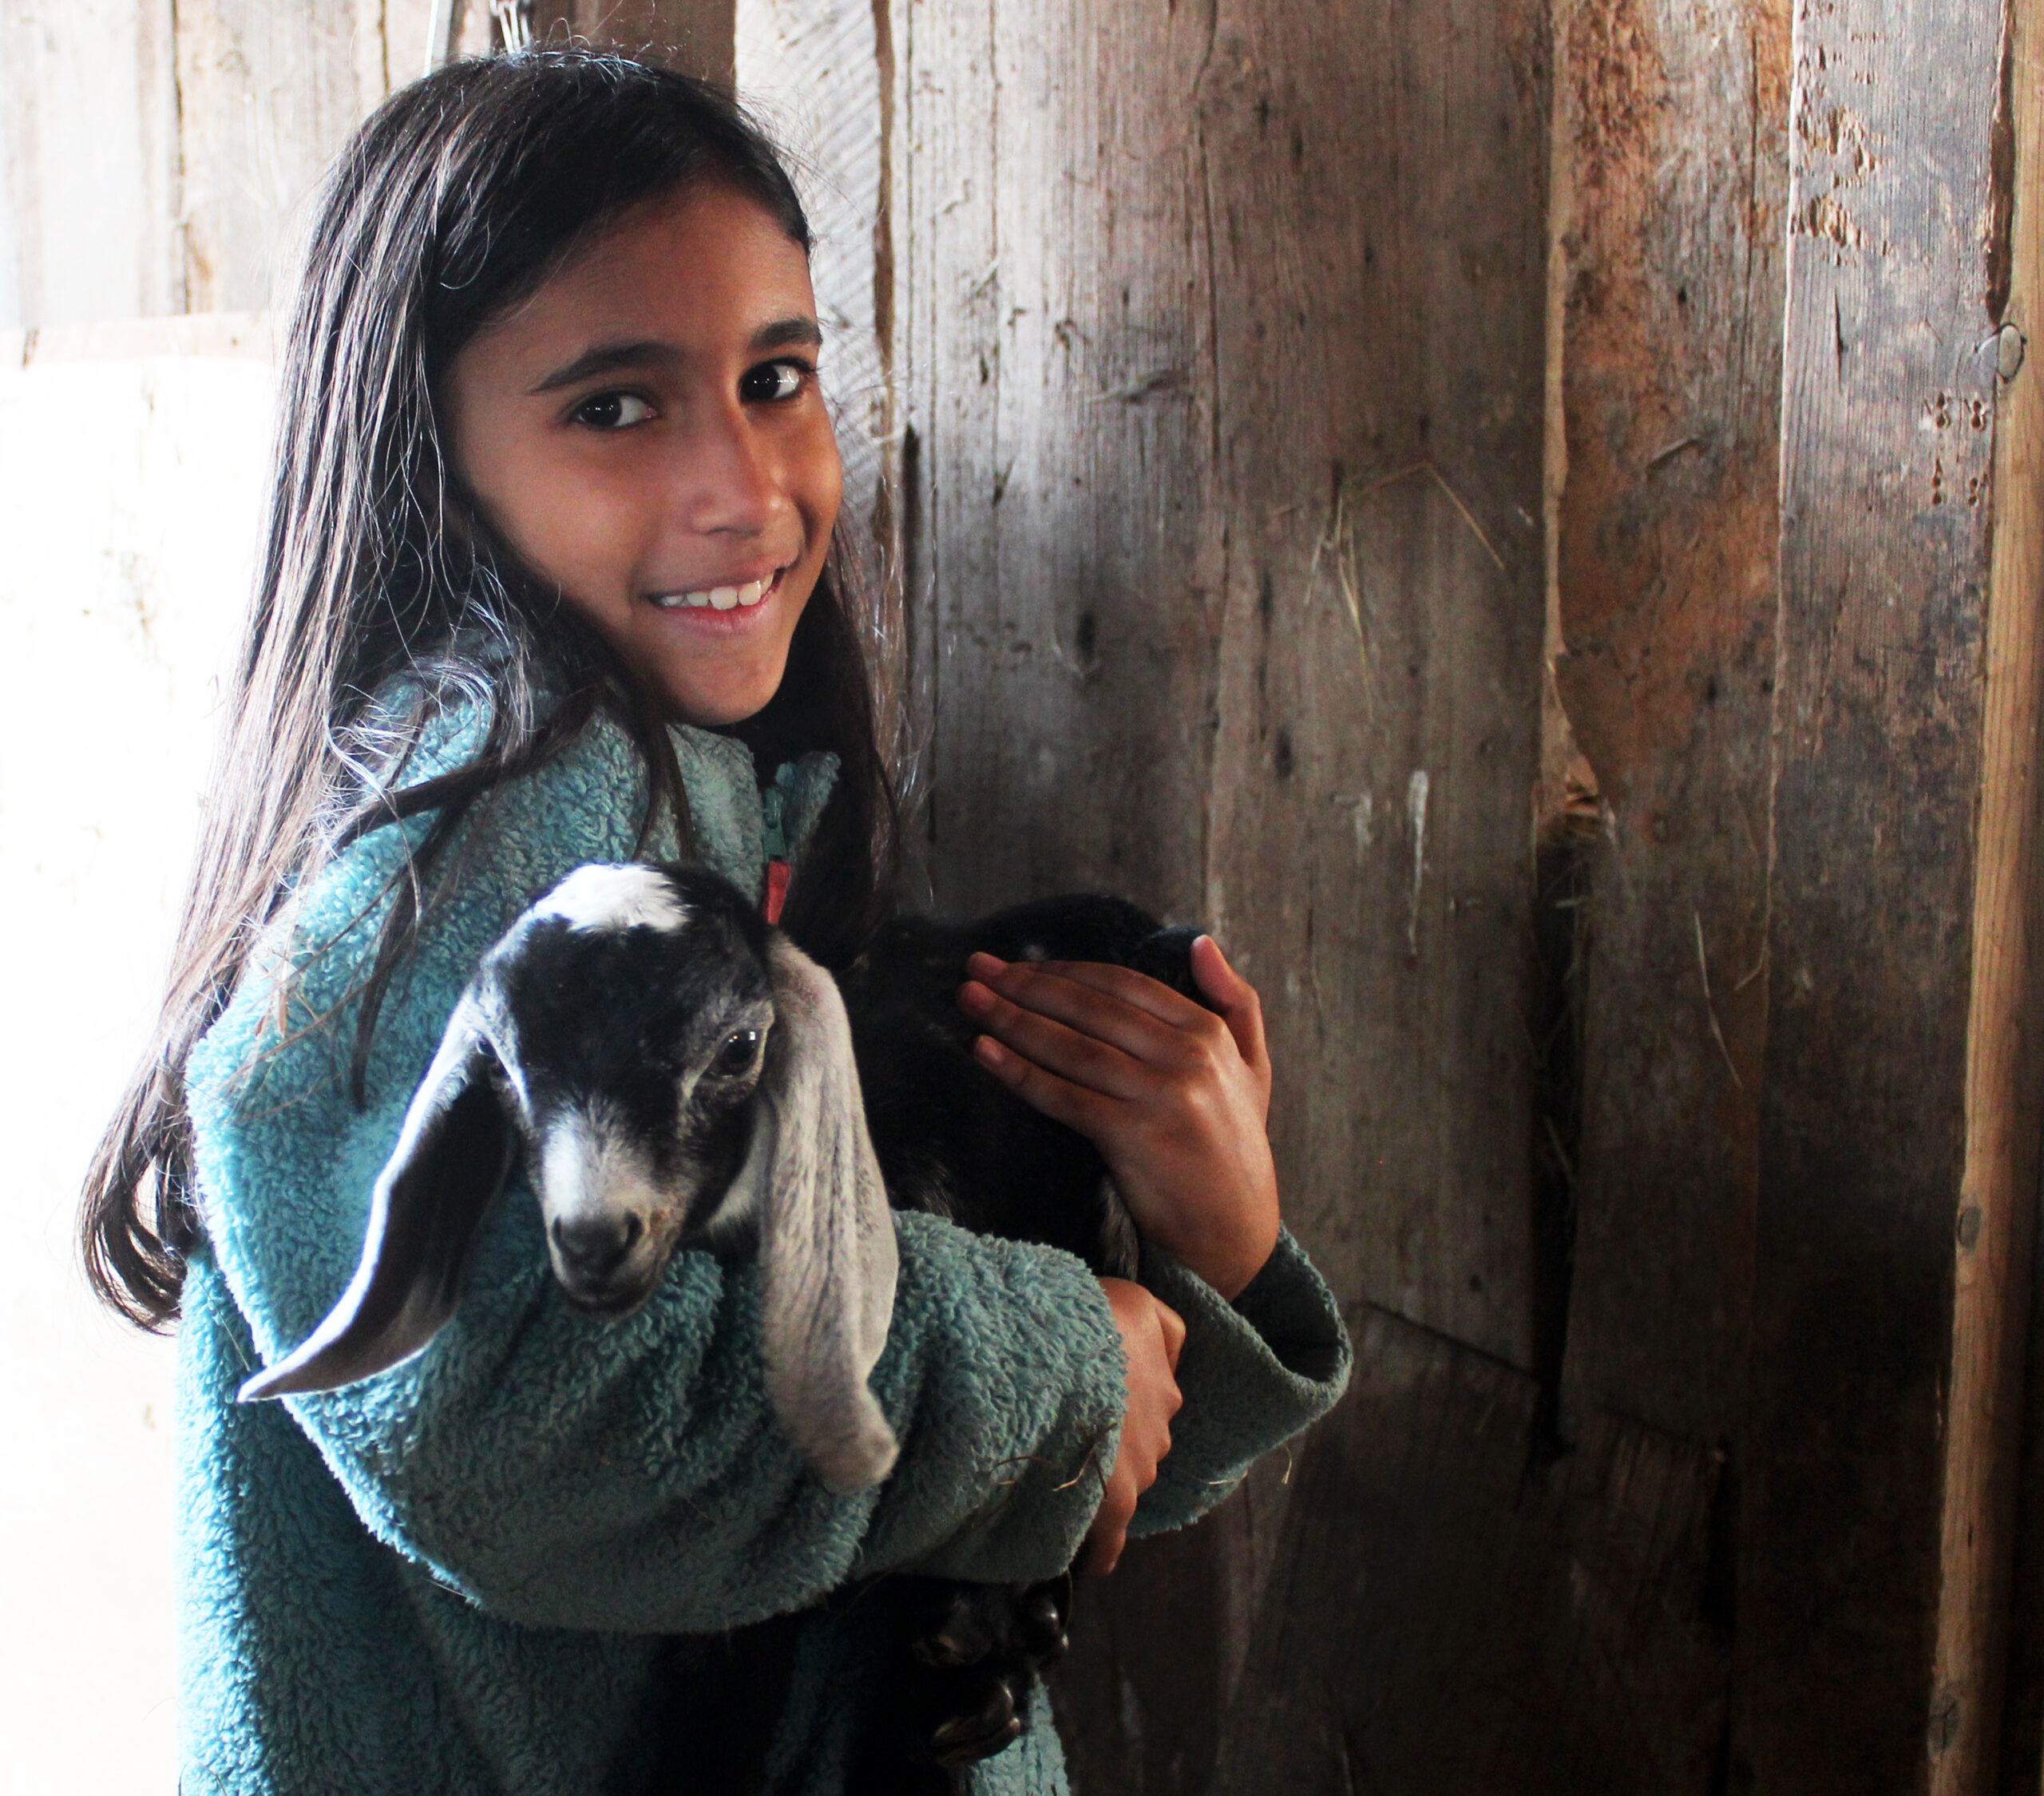 Young girl in grey fleece hugging a baby nubian goat with a wood barn wall backdrop.